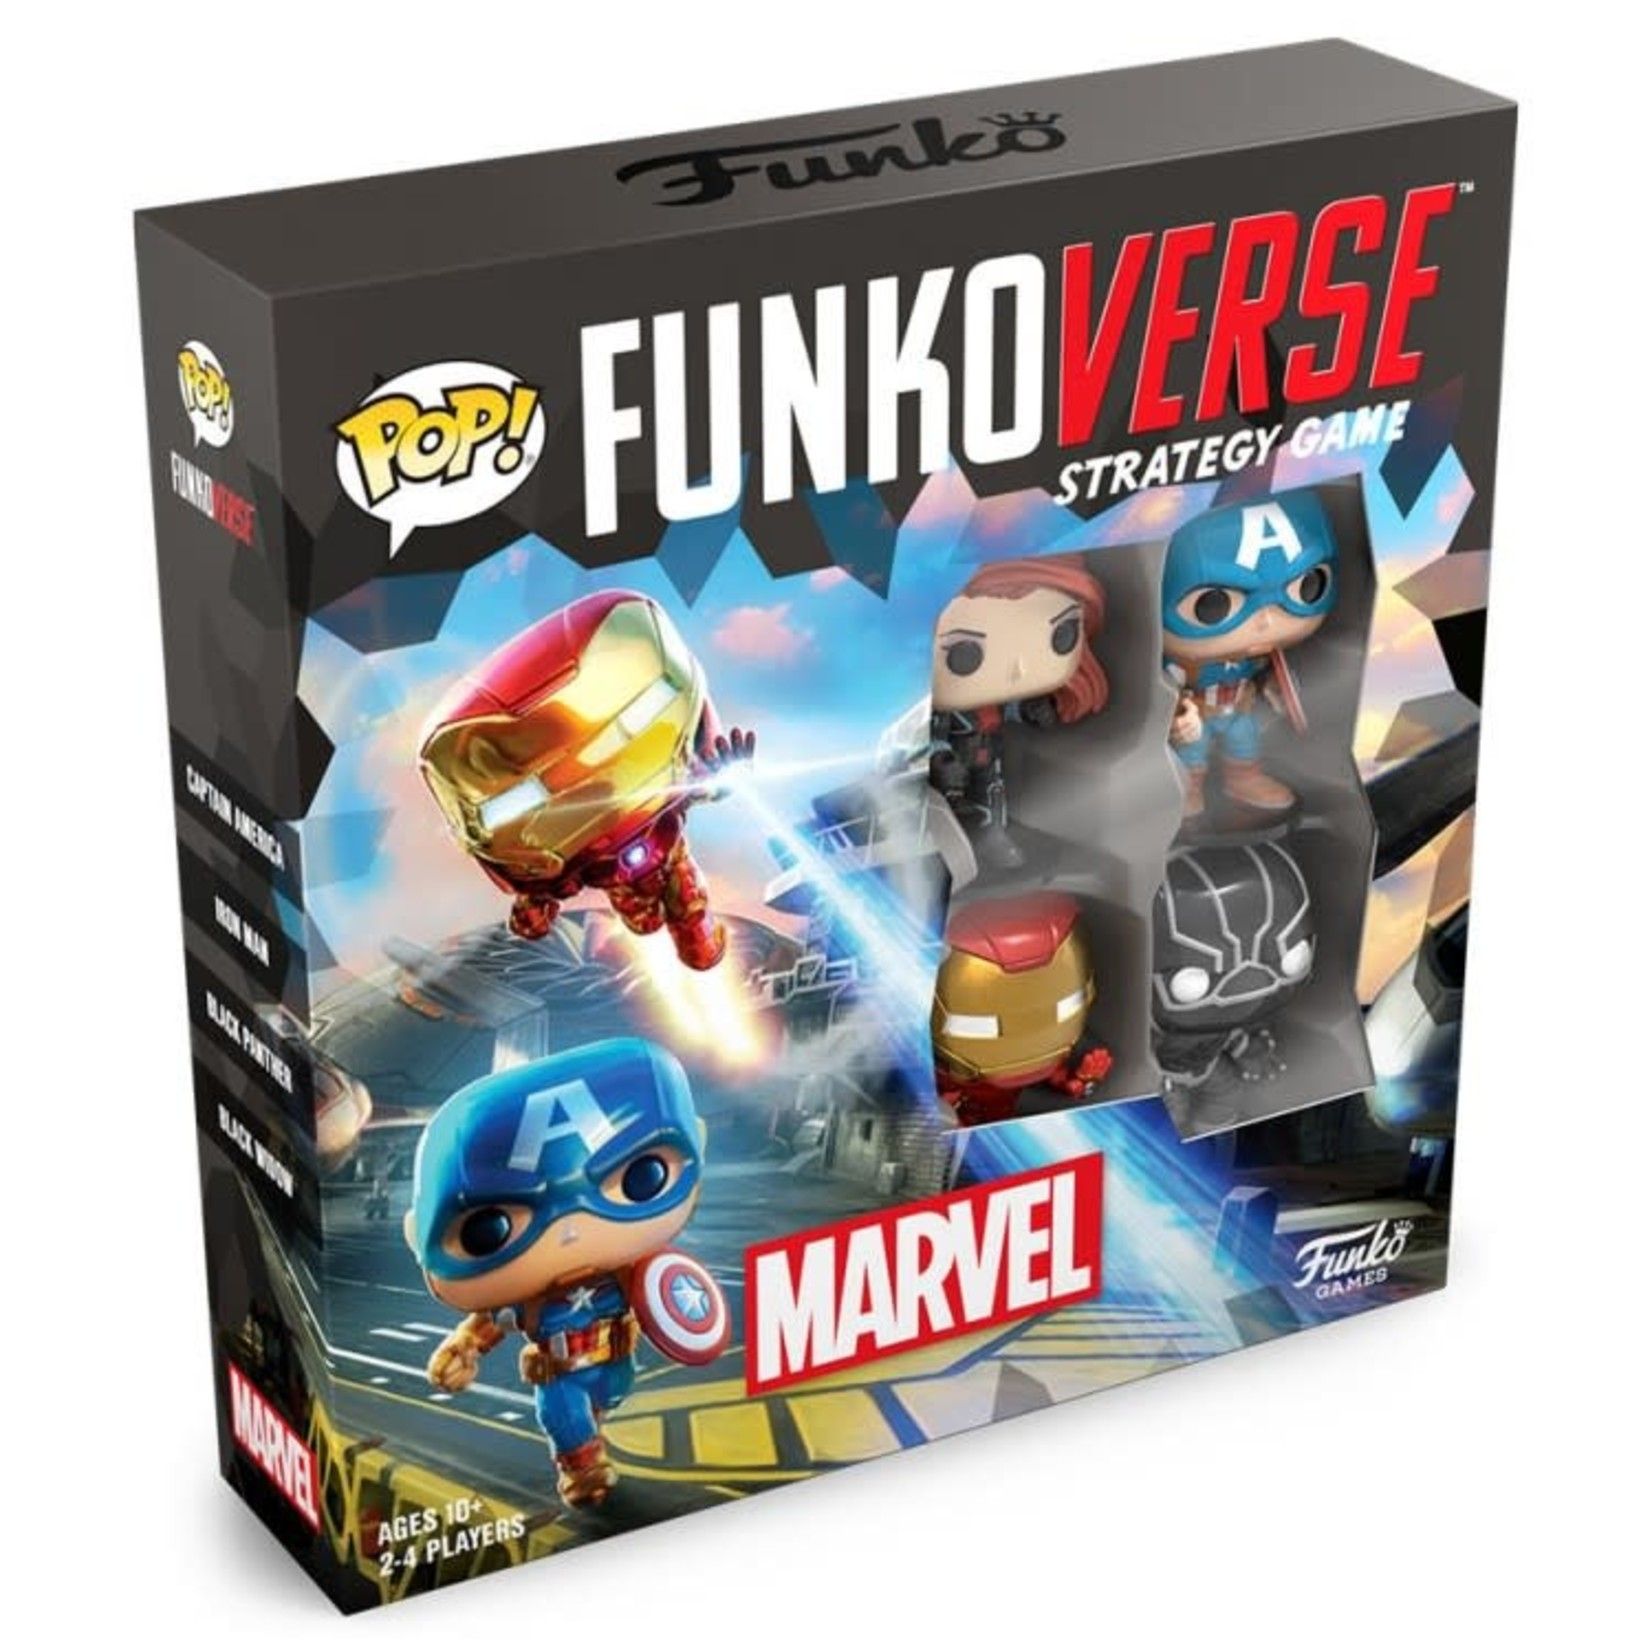 Funkoverse 4-pack with strategy game Best Marvel Funko Pop Sets